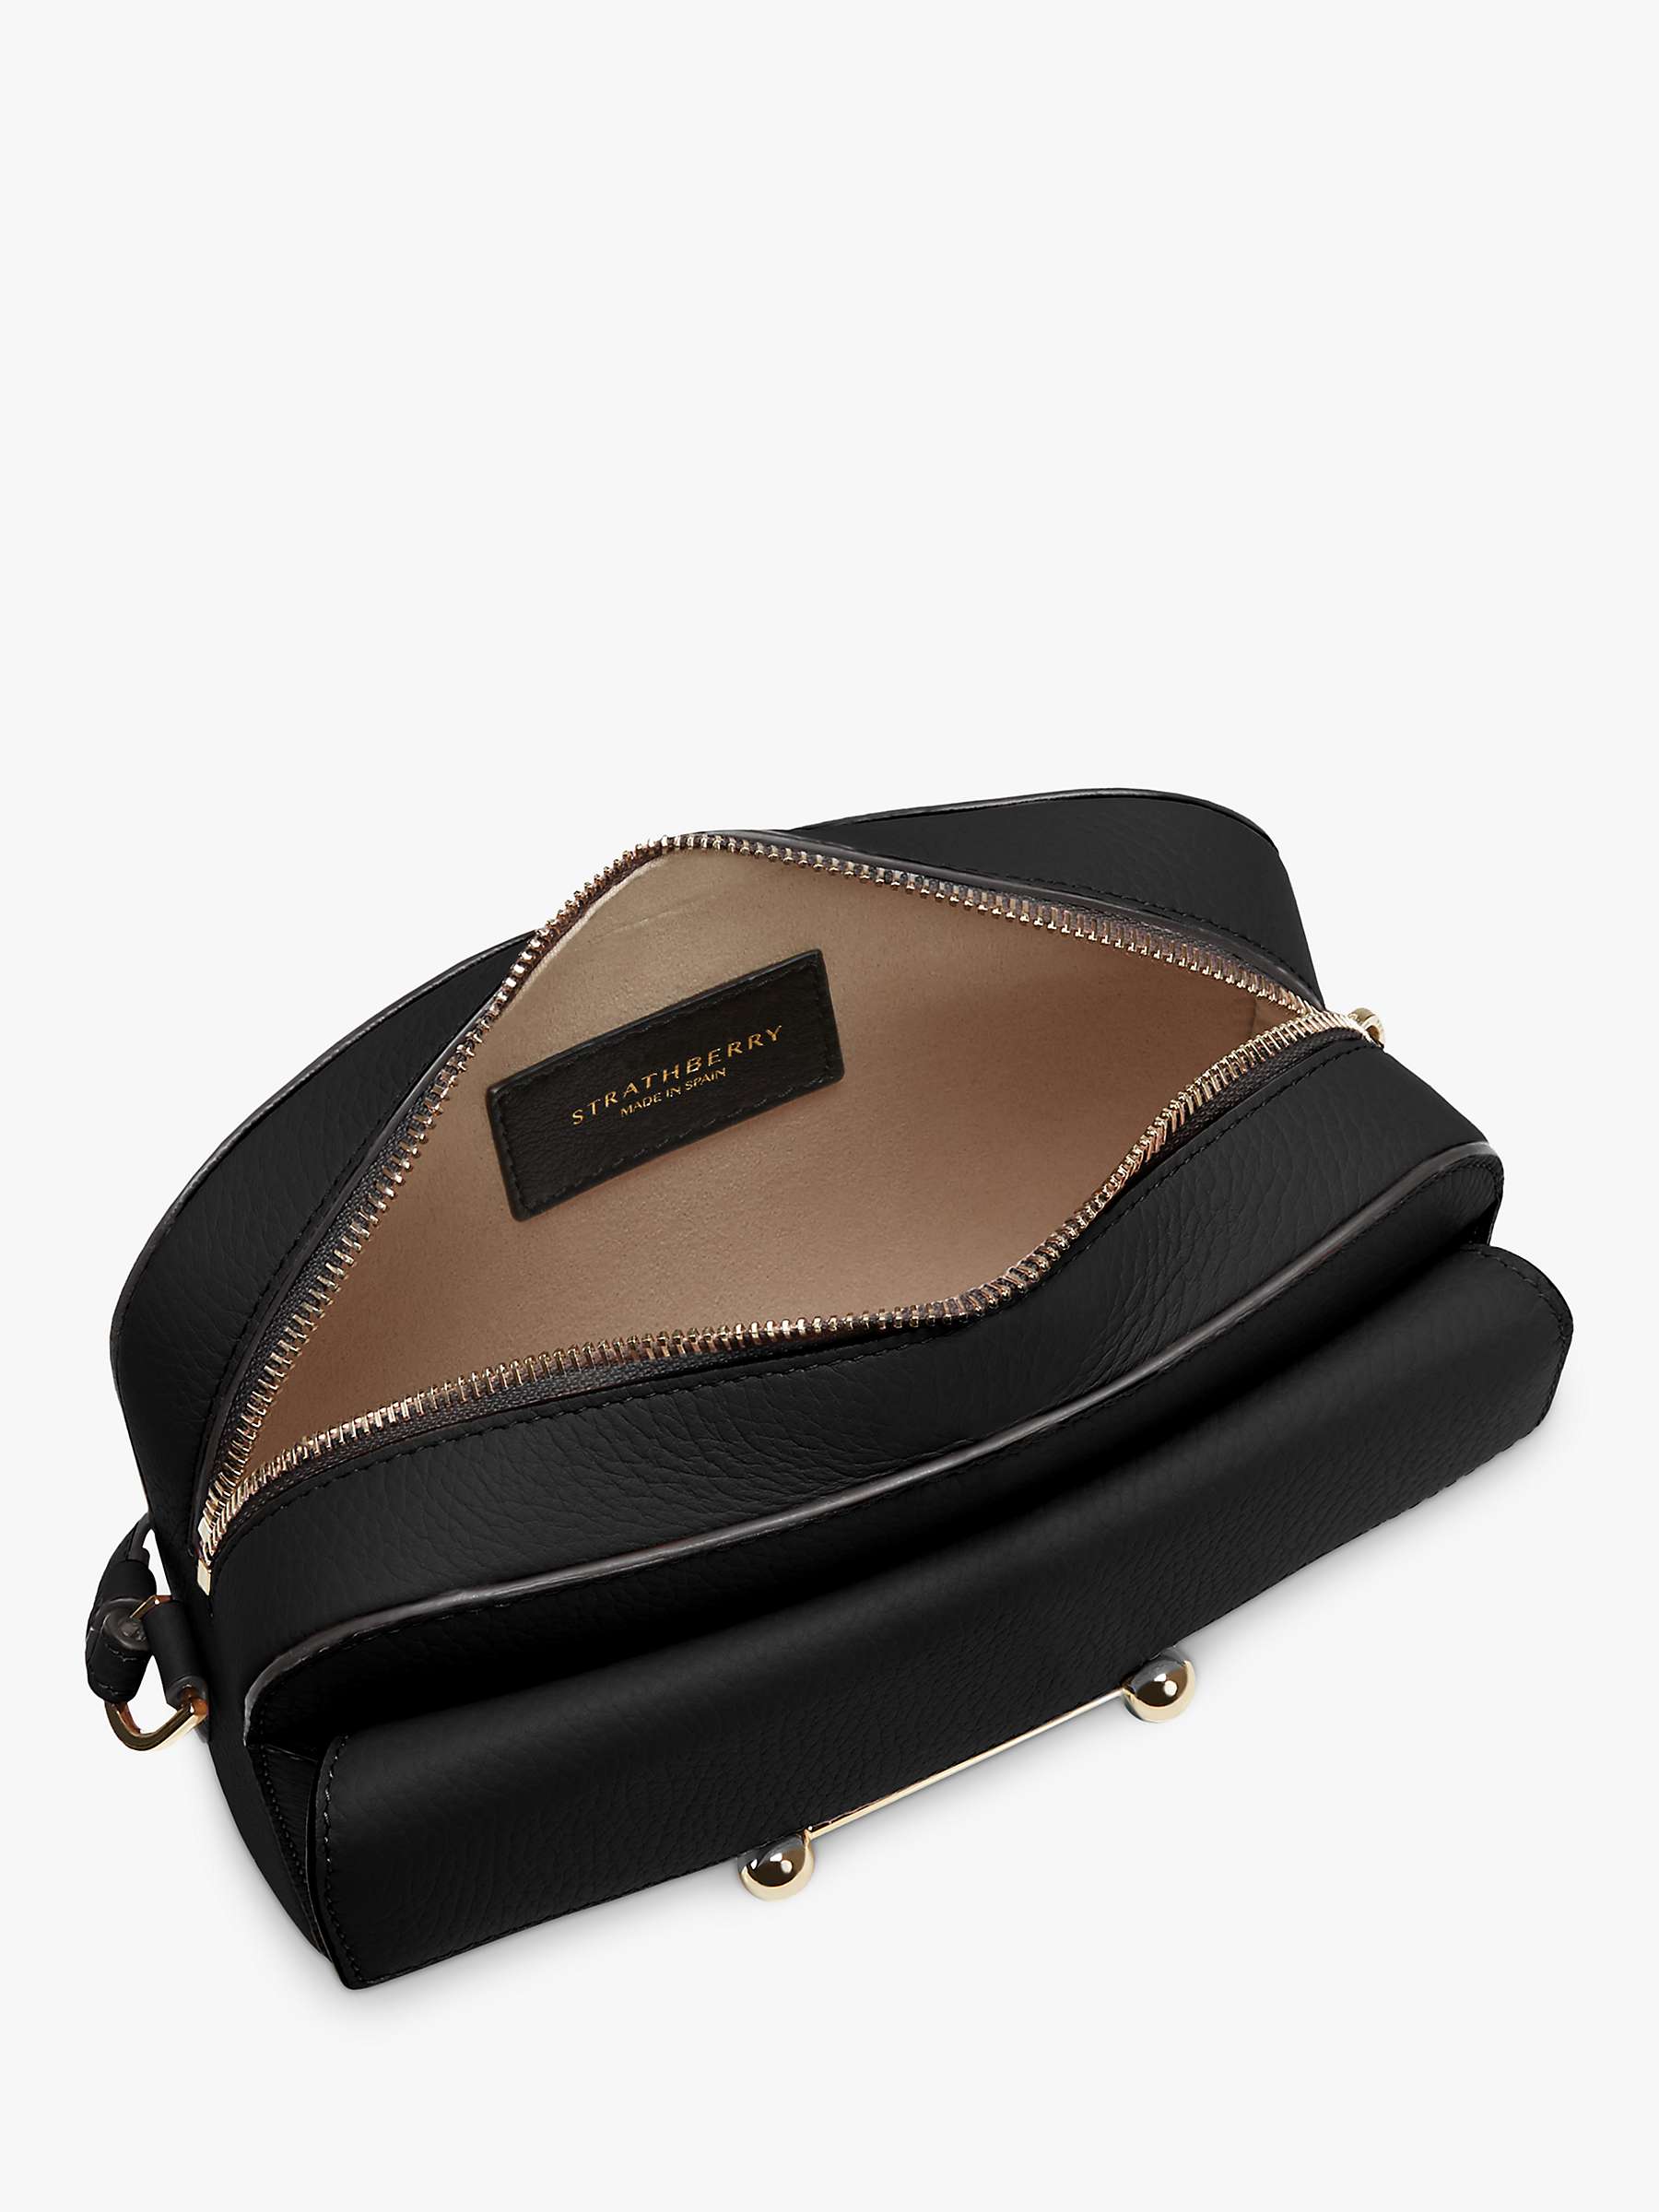 Buy Strathberry Mosaic Leather Camera Bag Online at johnlewis.com